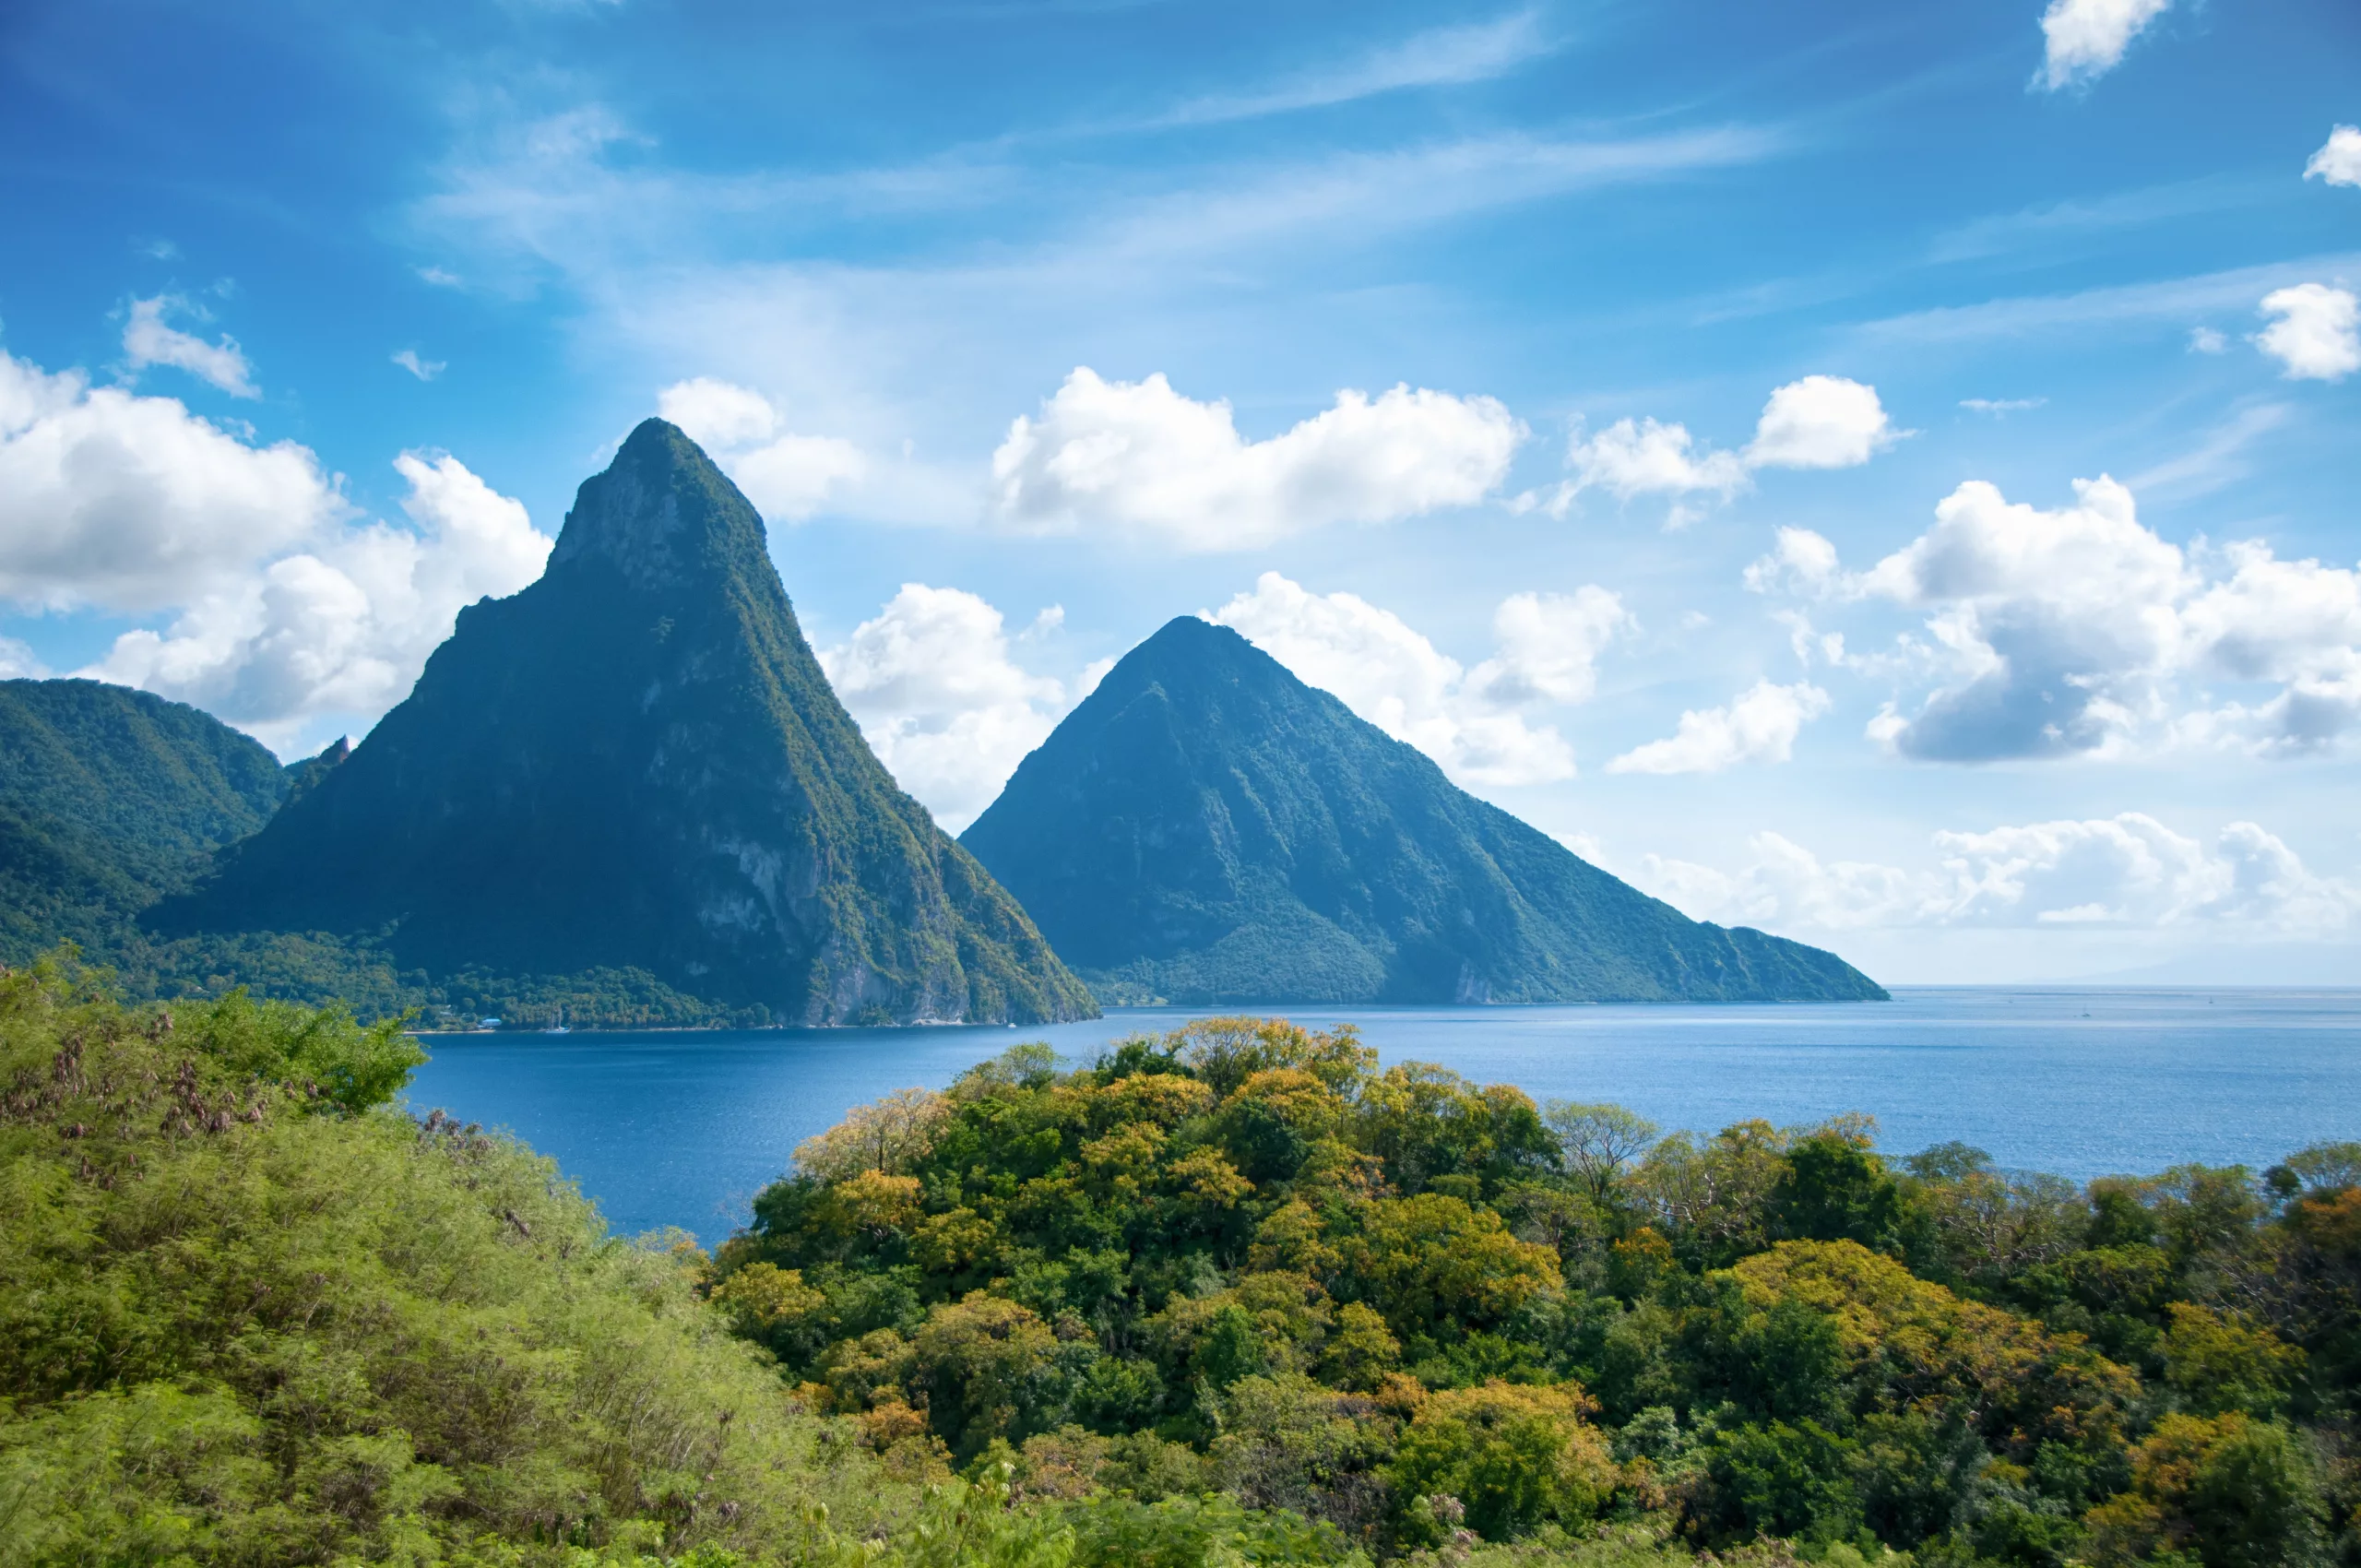 Get a forex license in Saint Lucia with experts